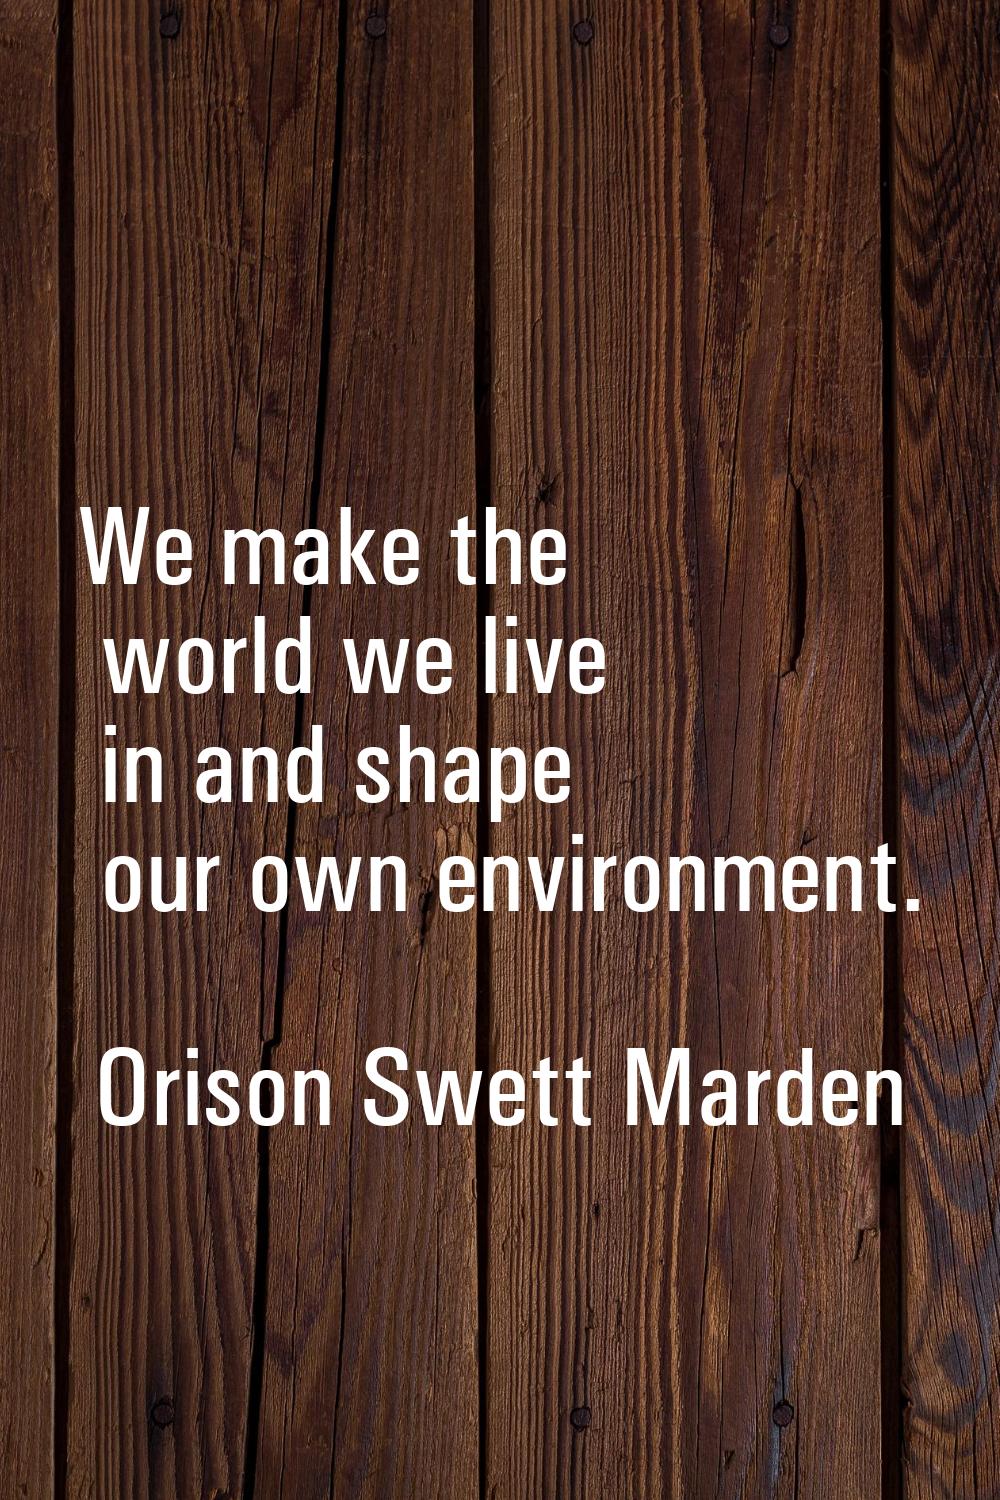 We make the world we live in and shape our own environment.